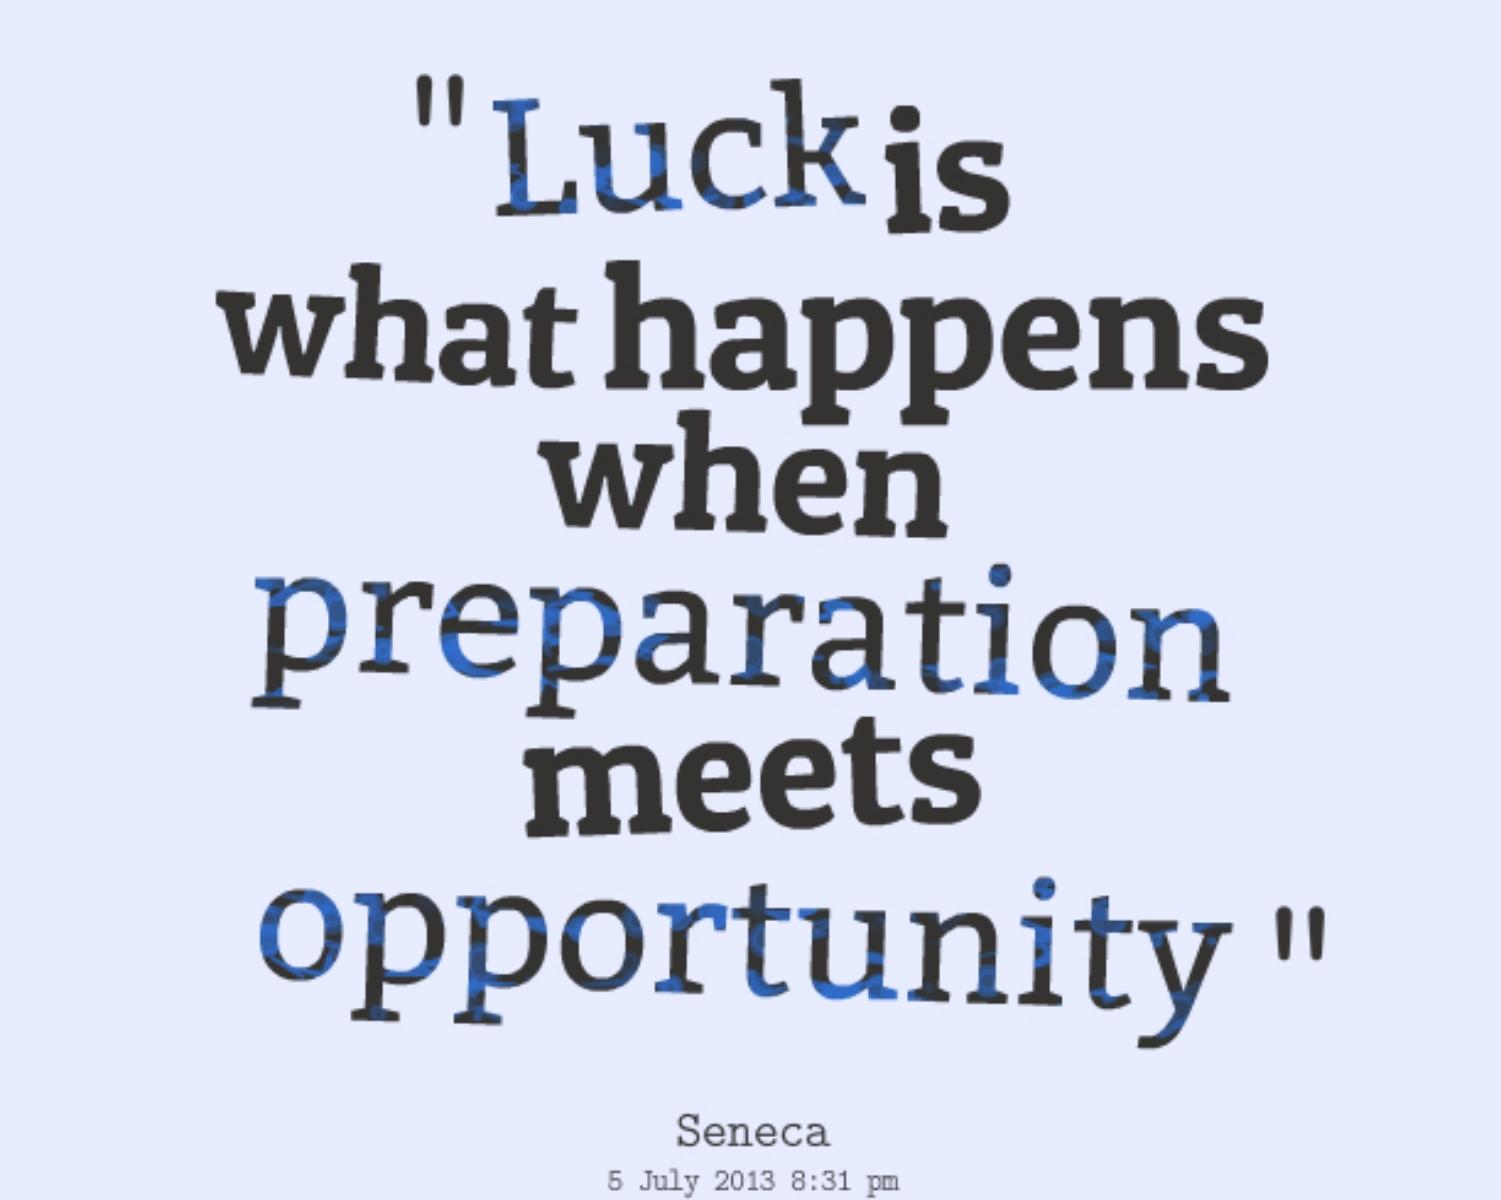 Preparation meets opportunity 